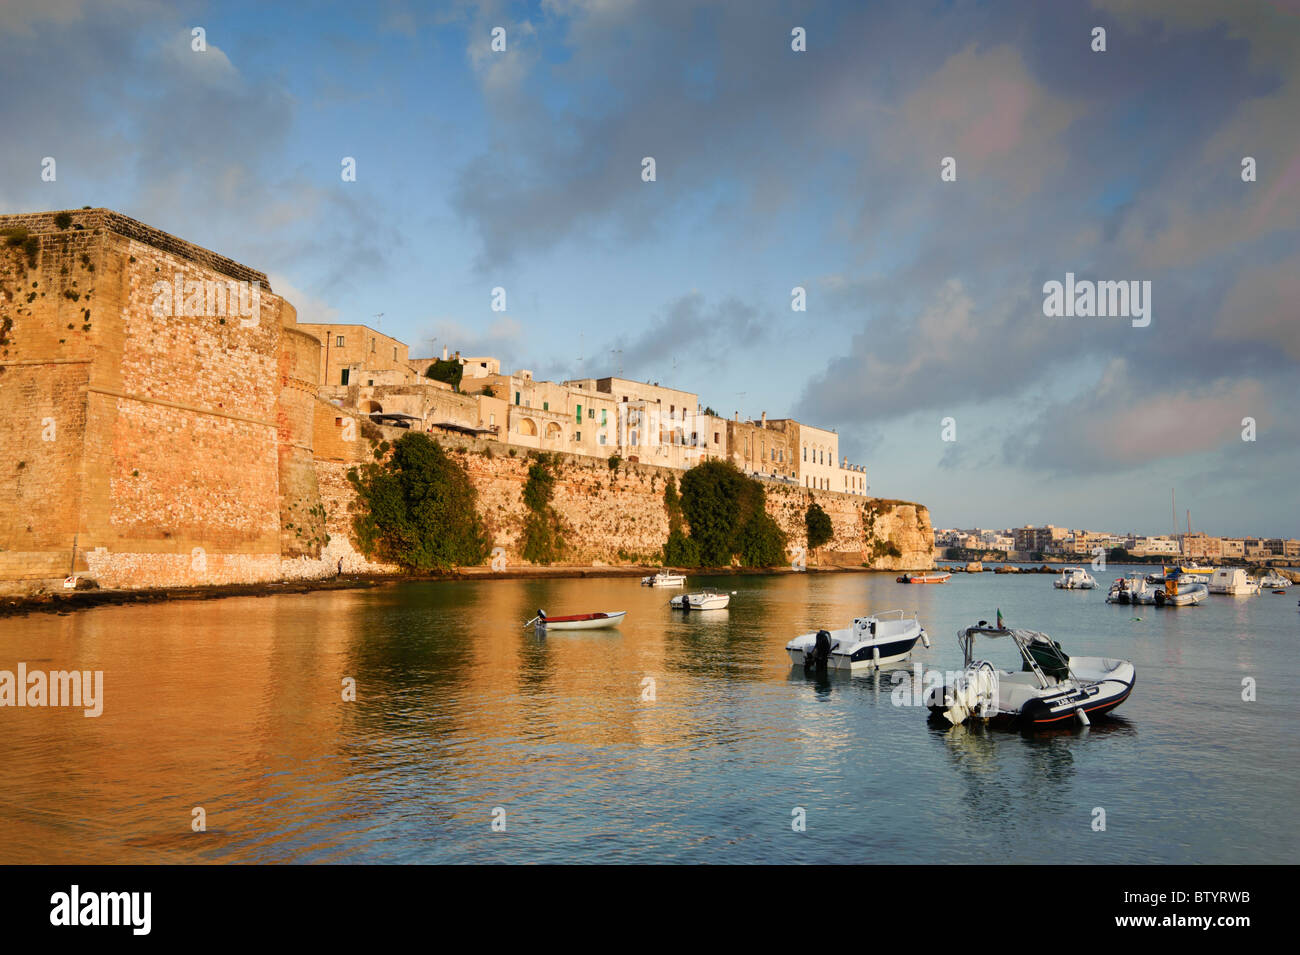 The port and fortifications of Otranto, Puglia, Italy Stock Photo